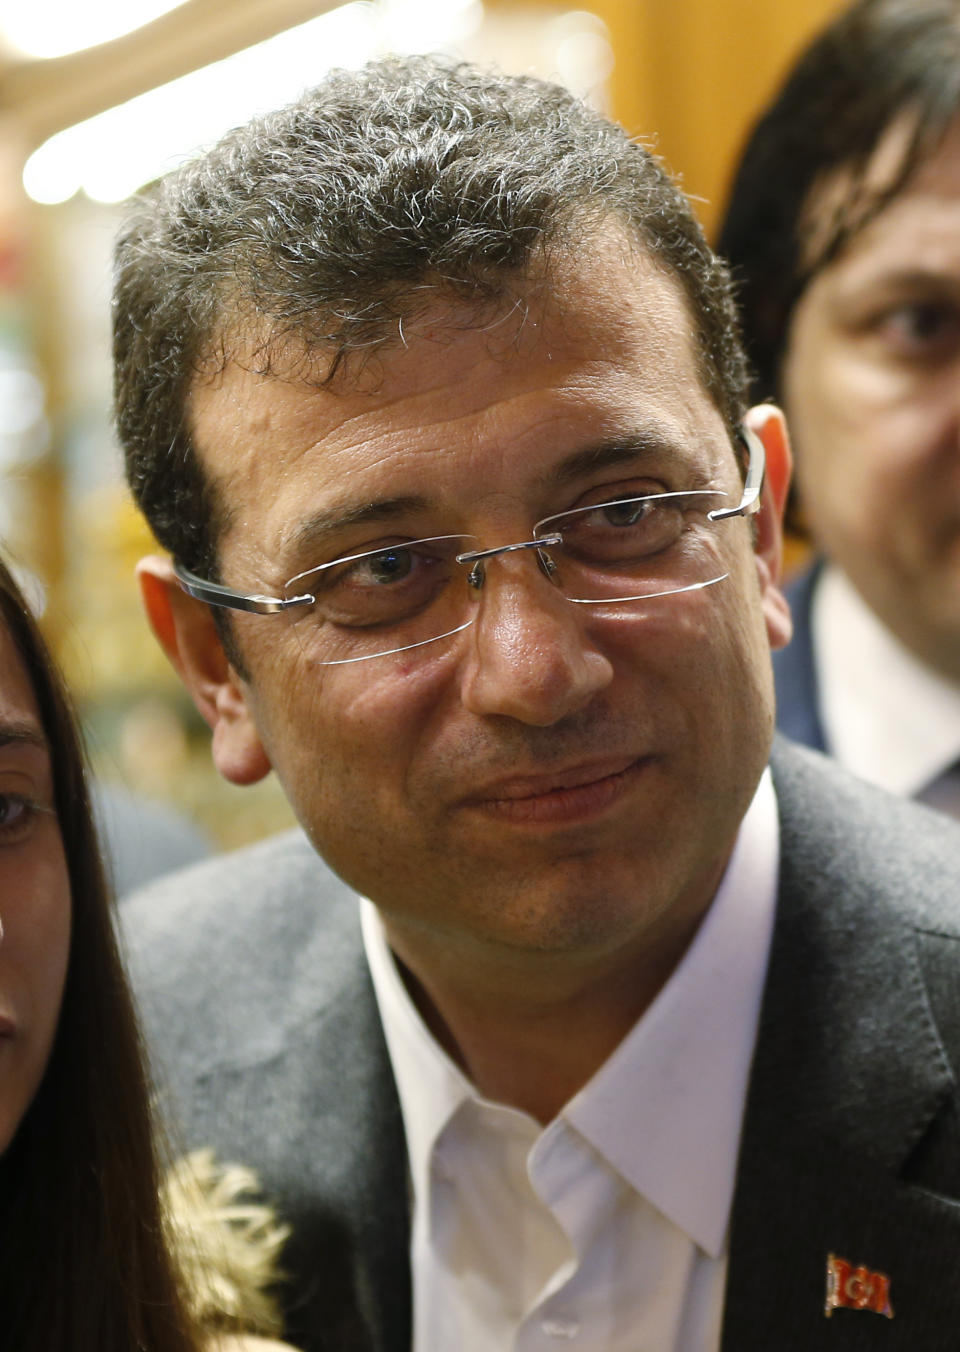 FILE-In this Tuesday, March 12, 2019 file photo, Ekrem Imamoglu, the mayoral candidate for Istanbul of Republican People's Party (CHP), poses for pictures with people during a campaign visit at the Spice Market, or the Egyptian Bazaar, in Istanbul, ahead of local elections scheduled for March 31, 2019. The race for the mayor of Istanbul could be a tight one and Turkey's President Recep Tayyip Erdogan has chosen former Prime Minister Binali Yildirim as a high-profile candidate. For Erdogan, the local elections are not just a vote to decide who should collect the garbage and maintain roads, they are about Turkey's future national "survival." (AP Photo/Lefteris Pitarakis, File)